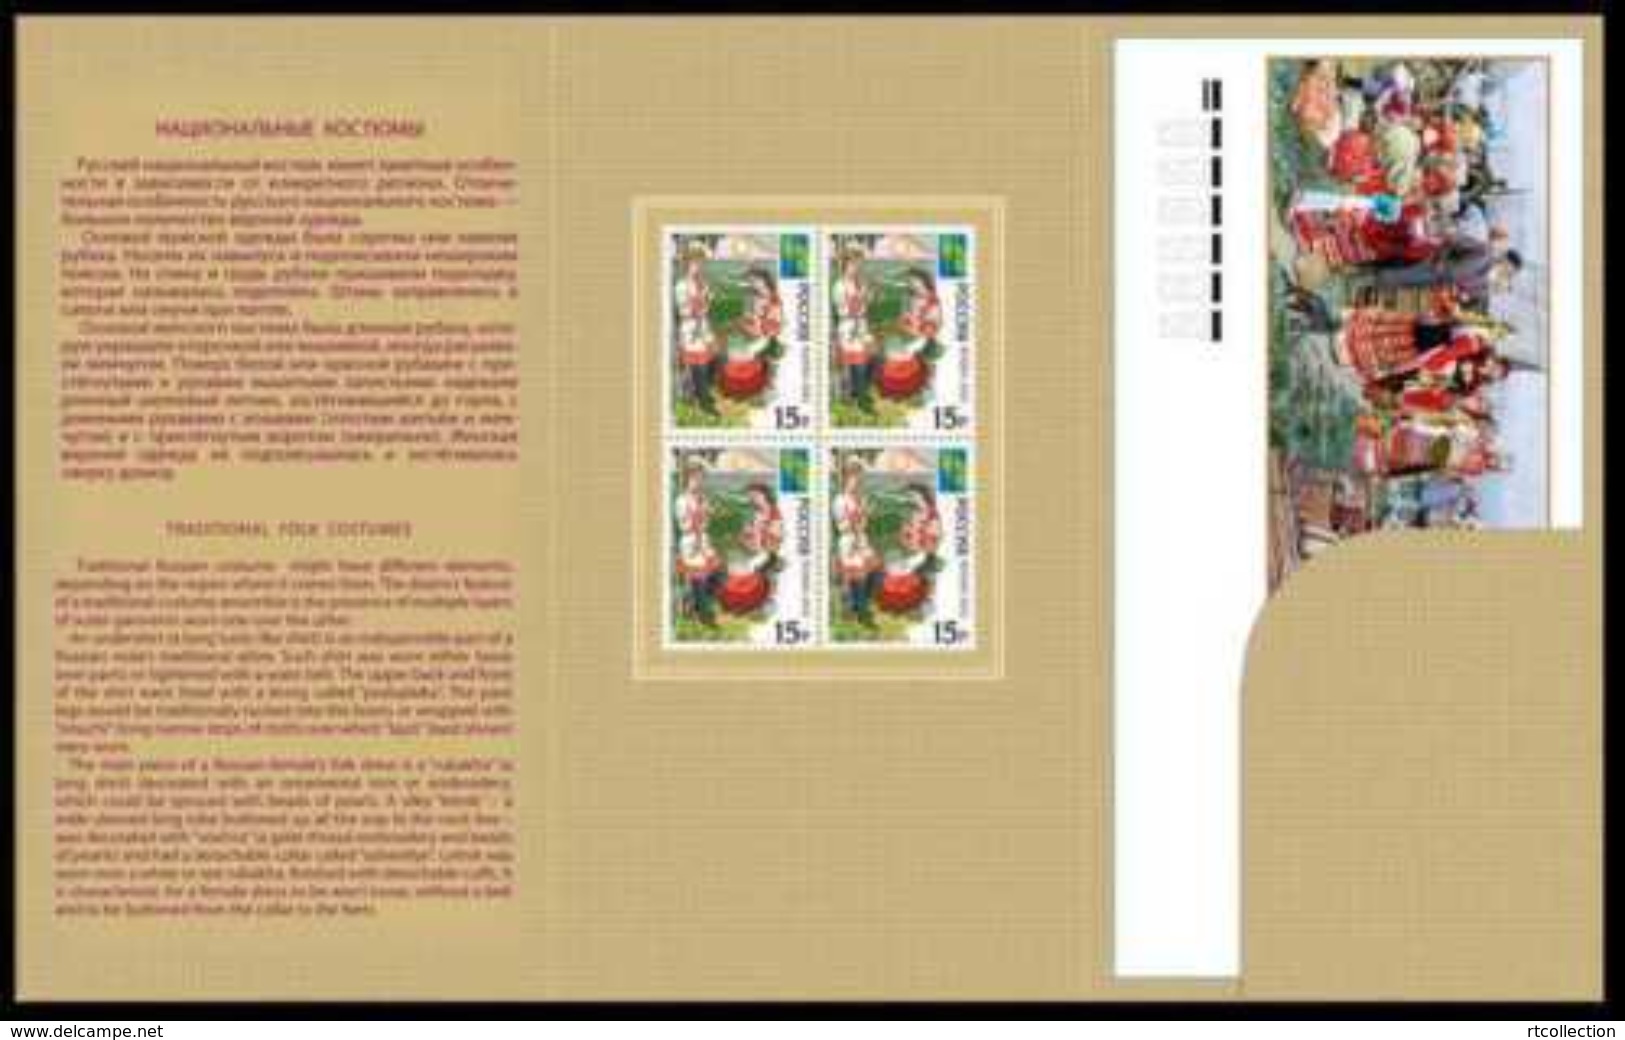 Russia 2012 Souvenir Pack Booklet Block Of 4 Stamps & FDC Art Folk Custumes Cloth Cultures Dress Joint Issue RCC Member - Collezioni